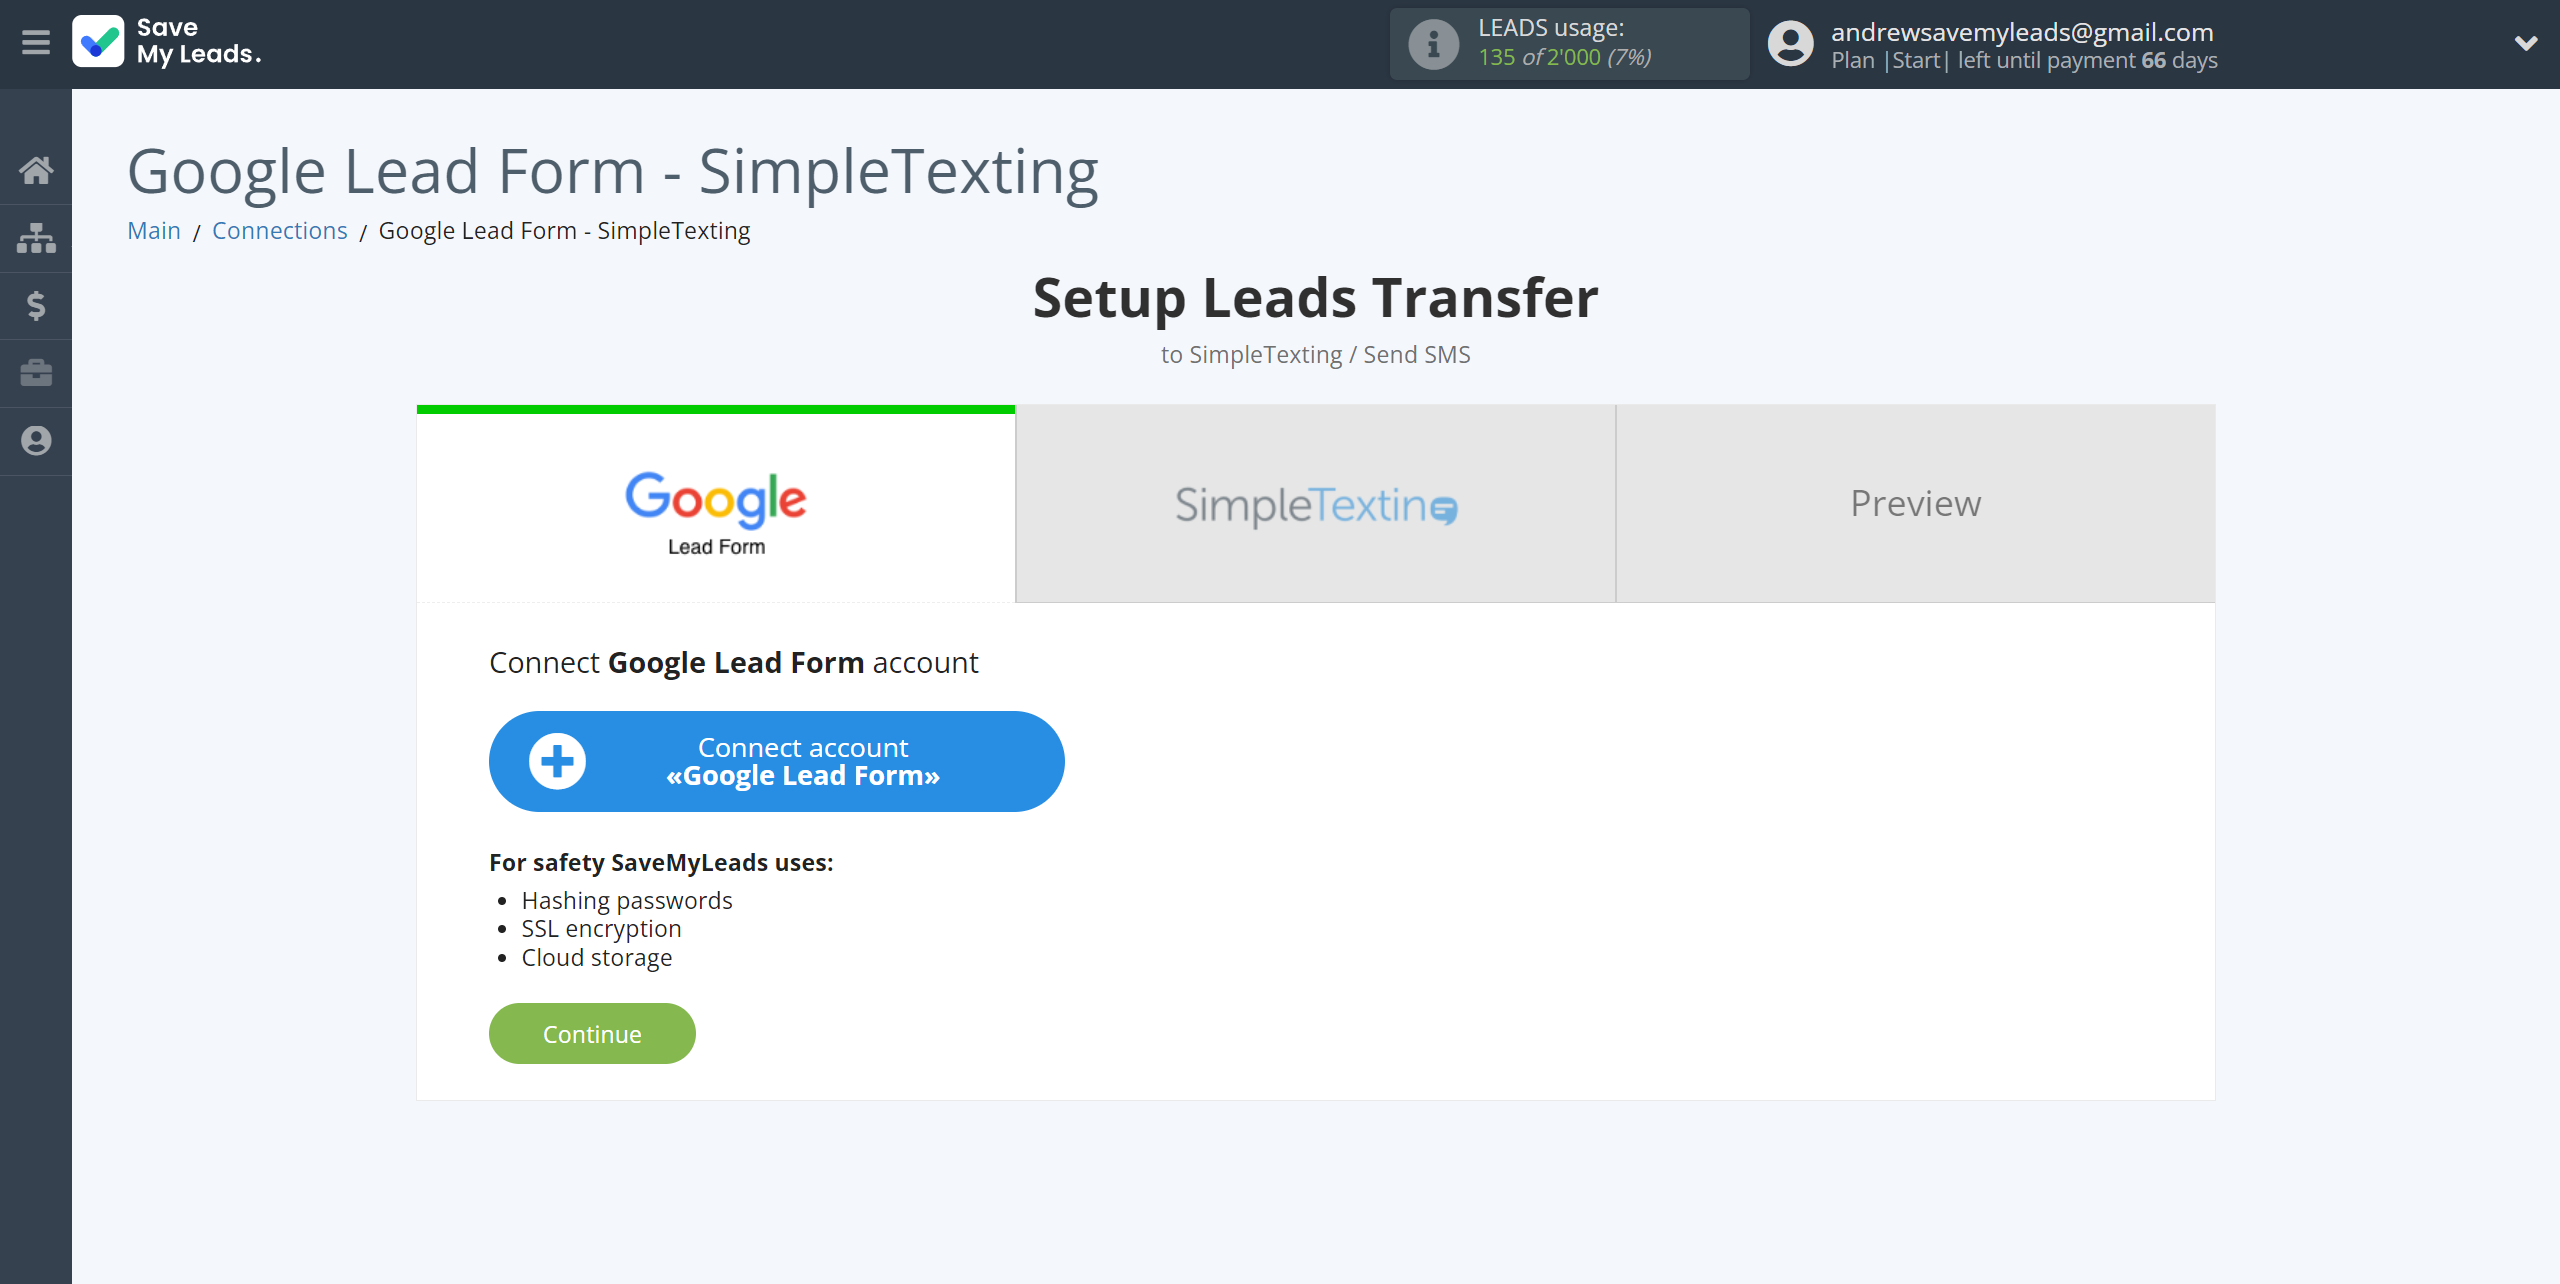 How to Connect Google Lead Form with SimpleTexting | Data Source account connection